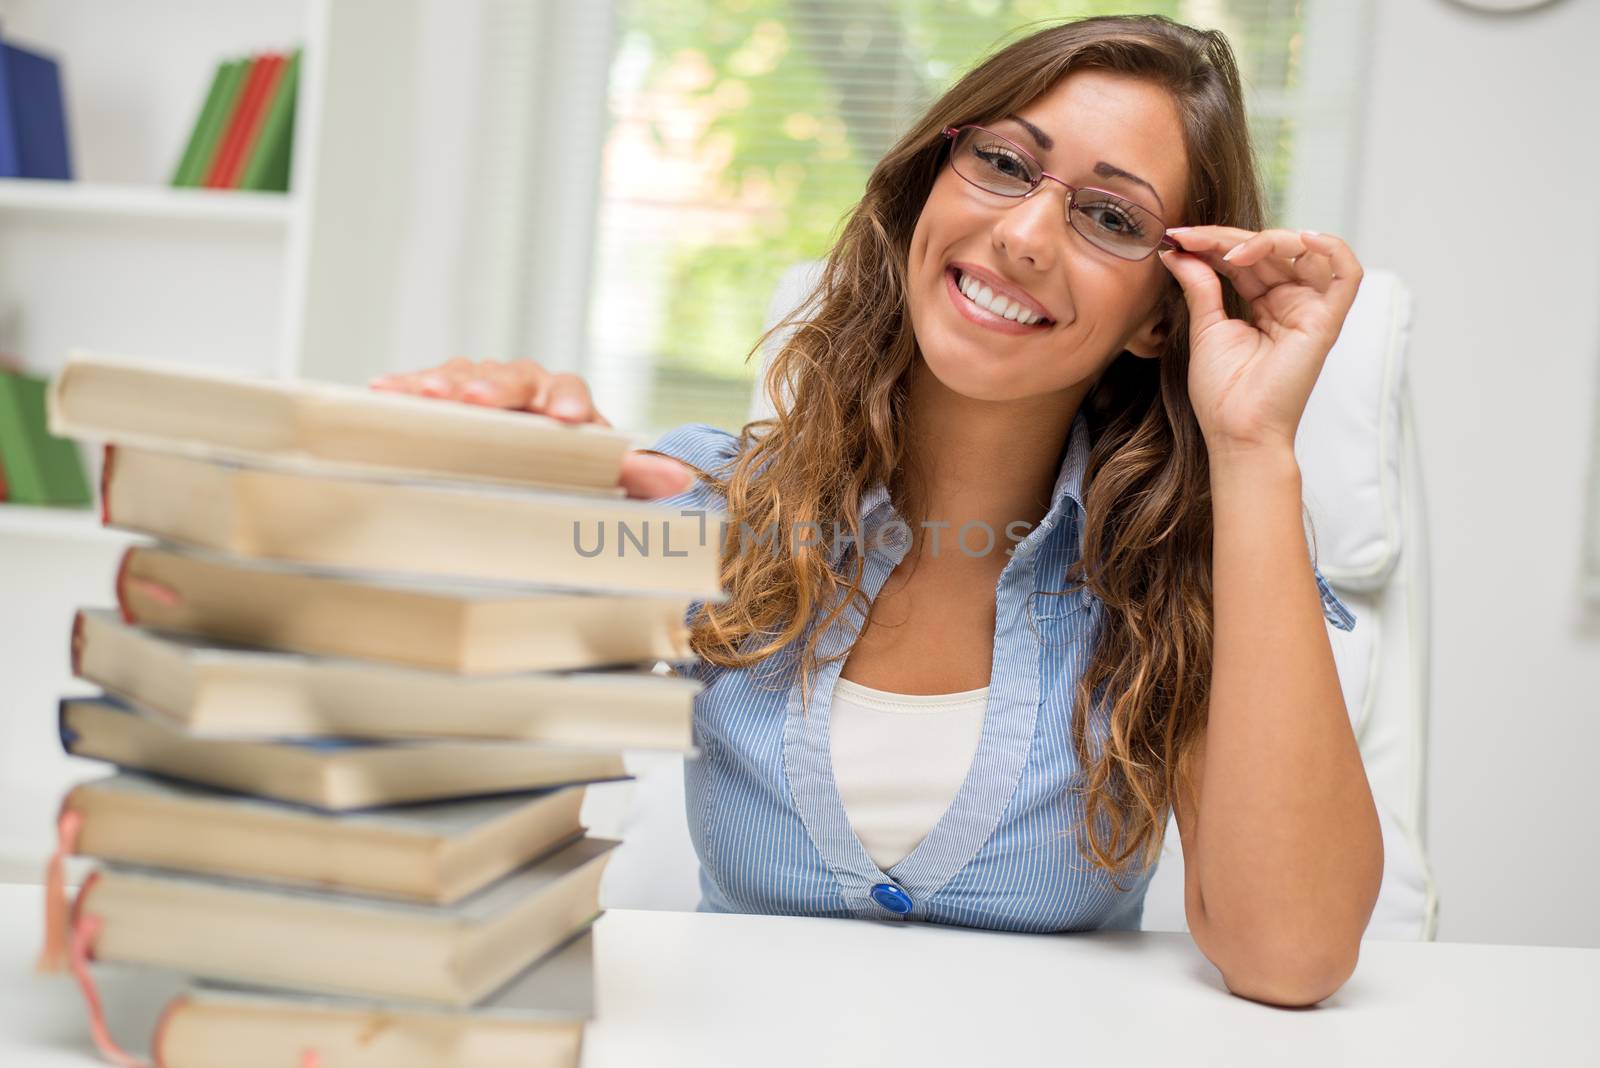 Beautiful teenage girl with eyeglasses sitting in library and holding hand on stack of books. Looking at camera and smiling.